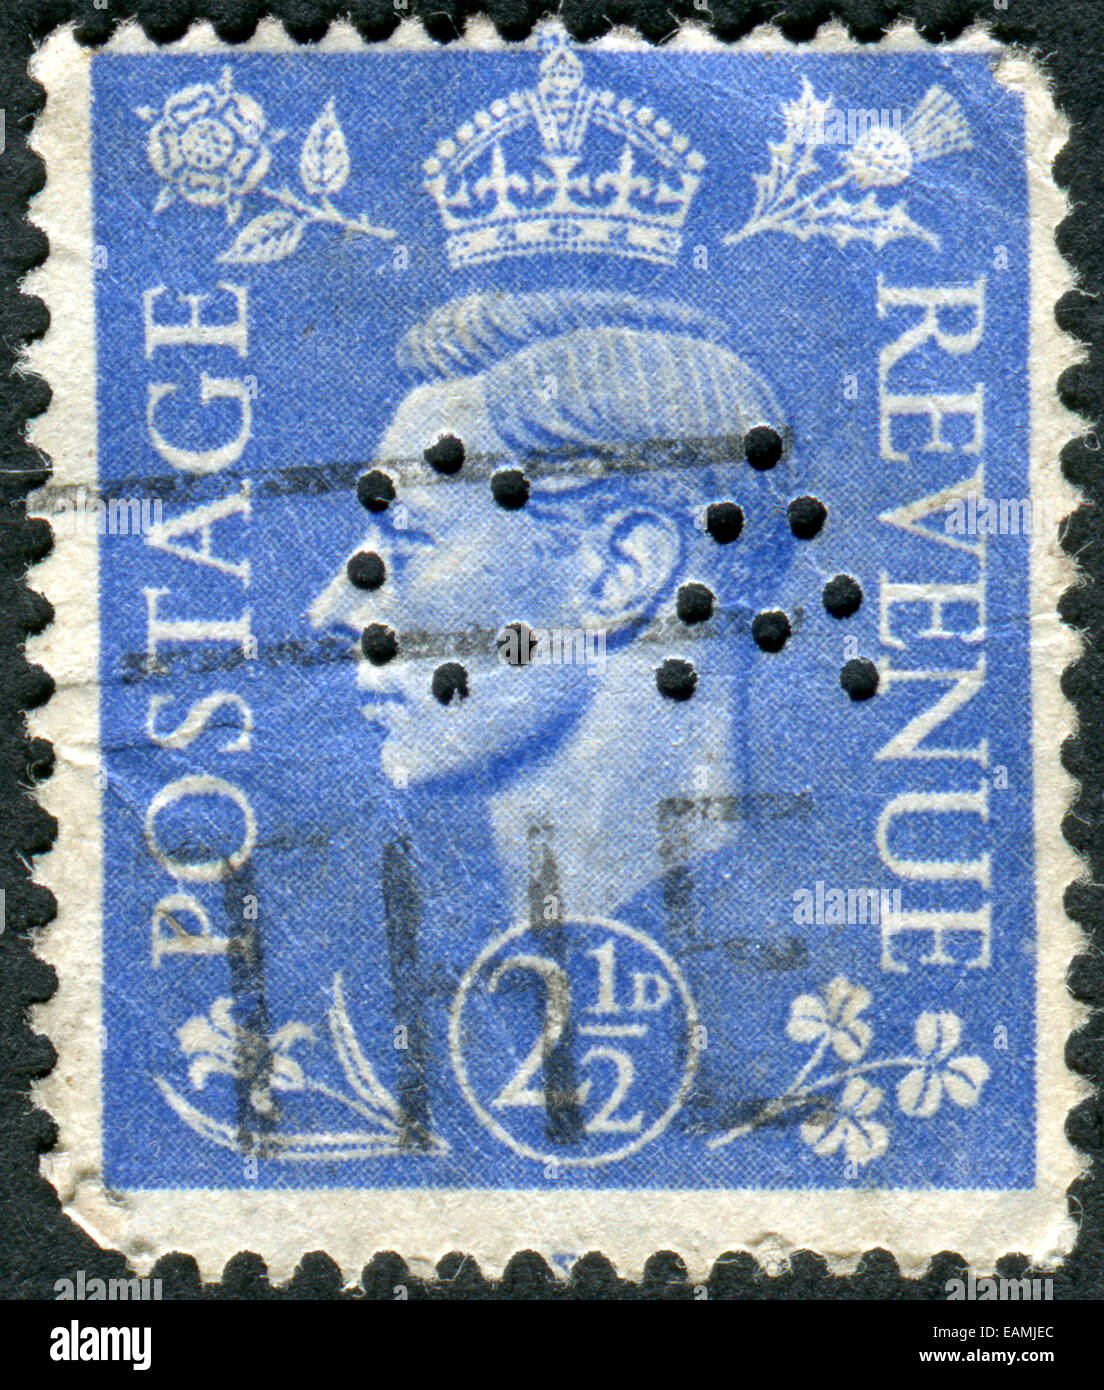 Postage stamp printed in England, shows King of the United Kingdom and the Dominions of the British Commonwealth, George VI Stock Photo